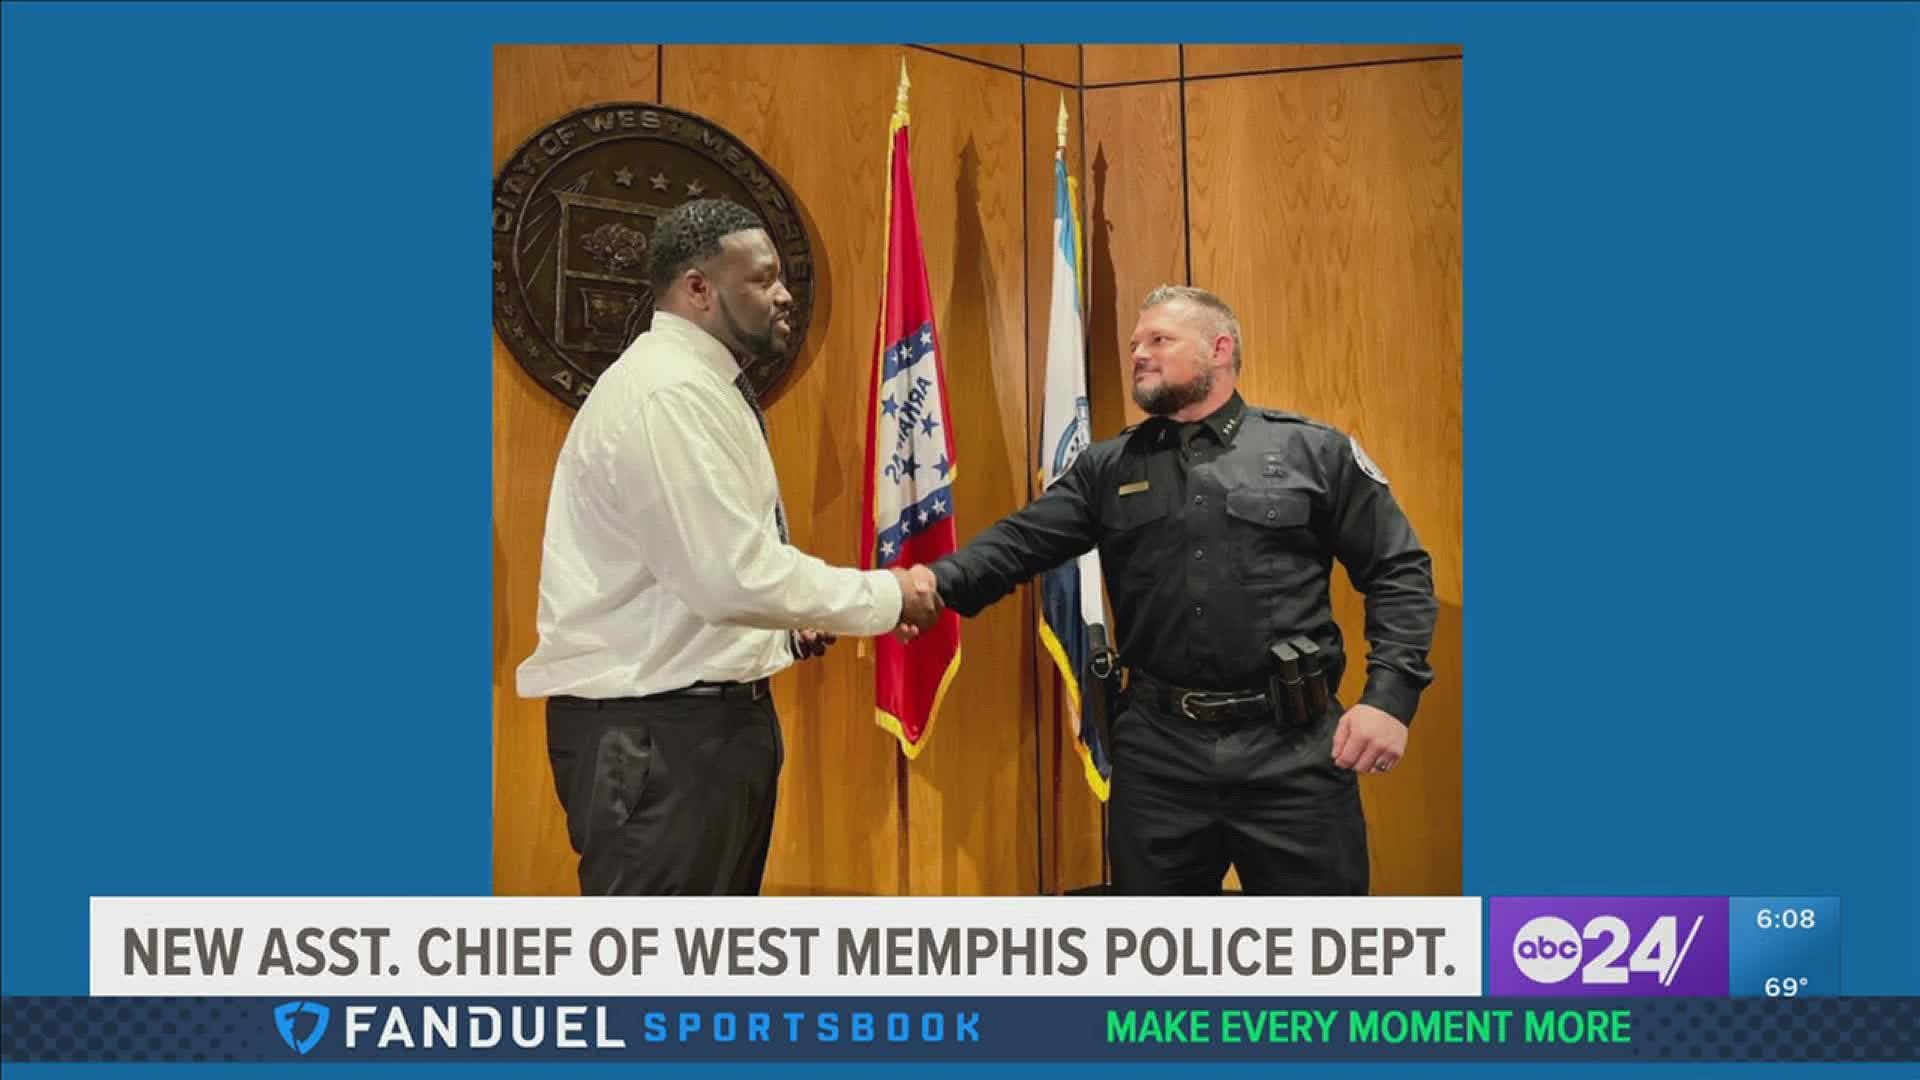 Bradley started off as a patrolman in 2004 and was promoted Tuesday to Assistant Police Chief for the West Memphis Police Department.